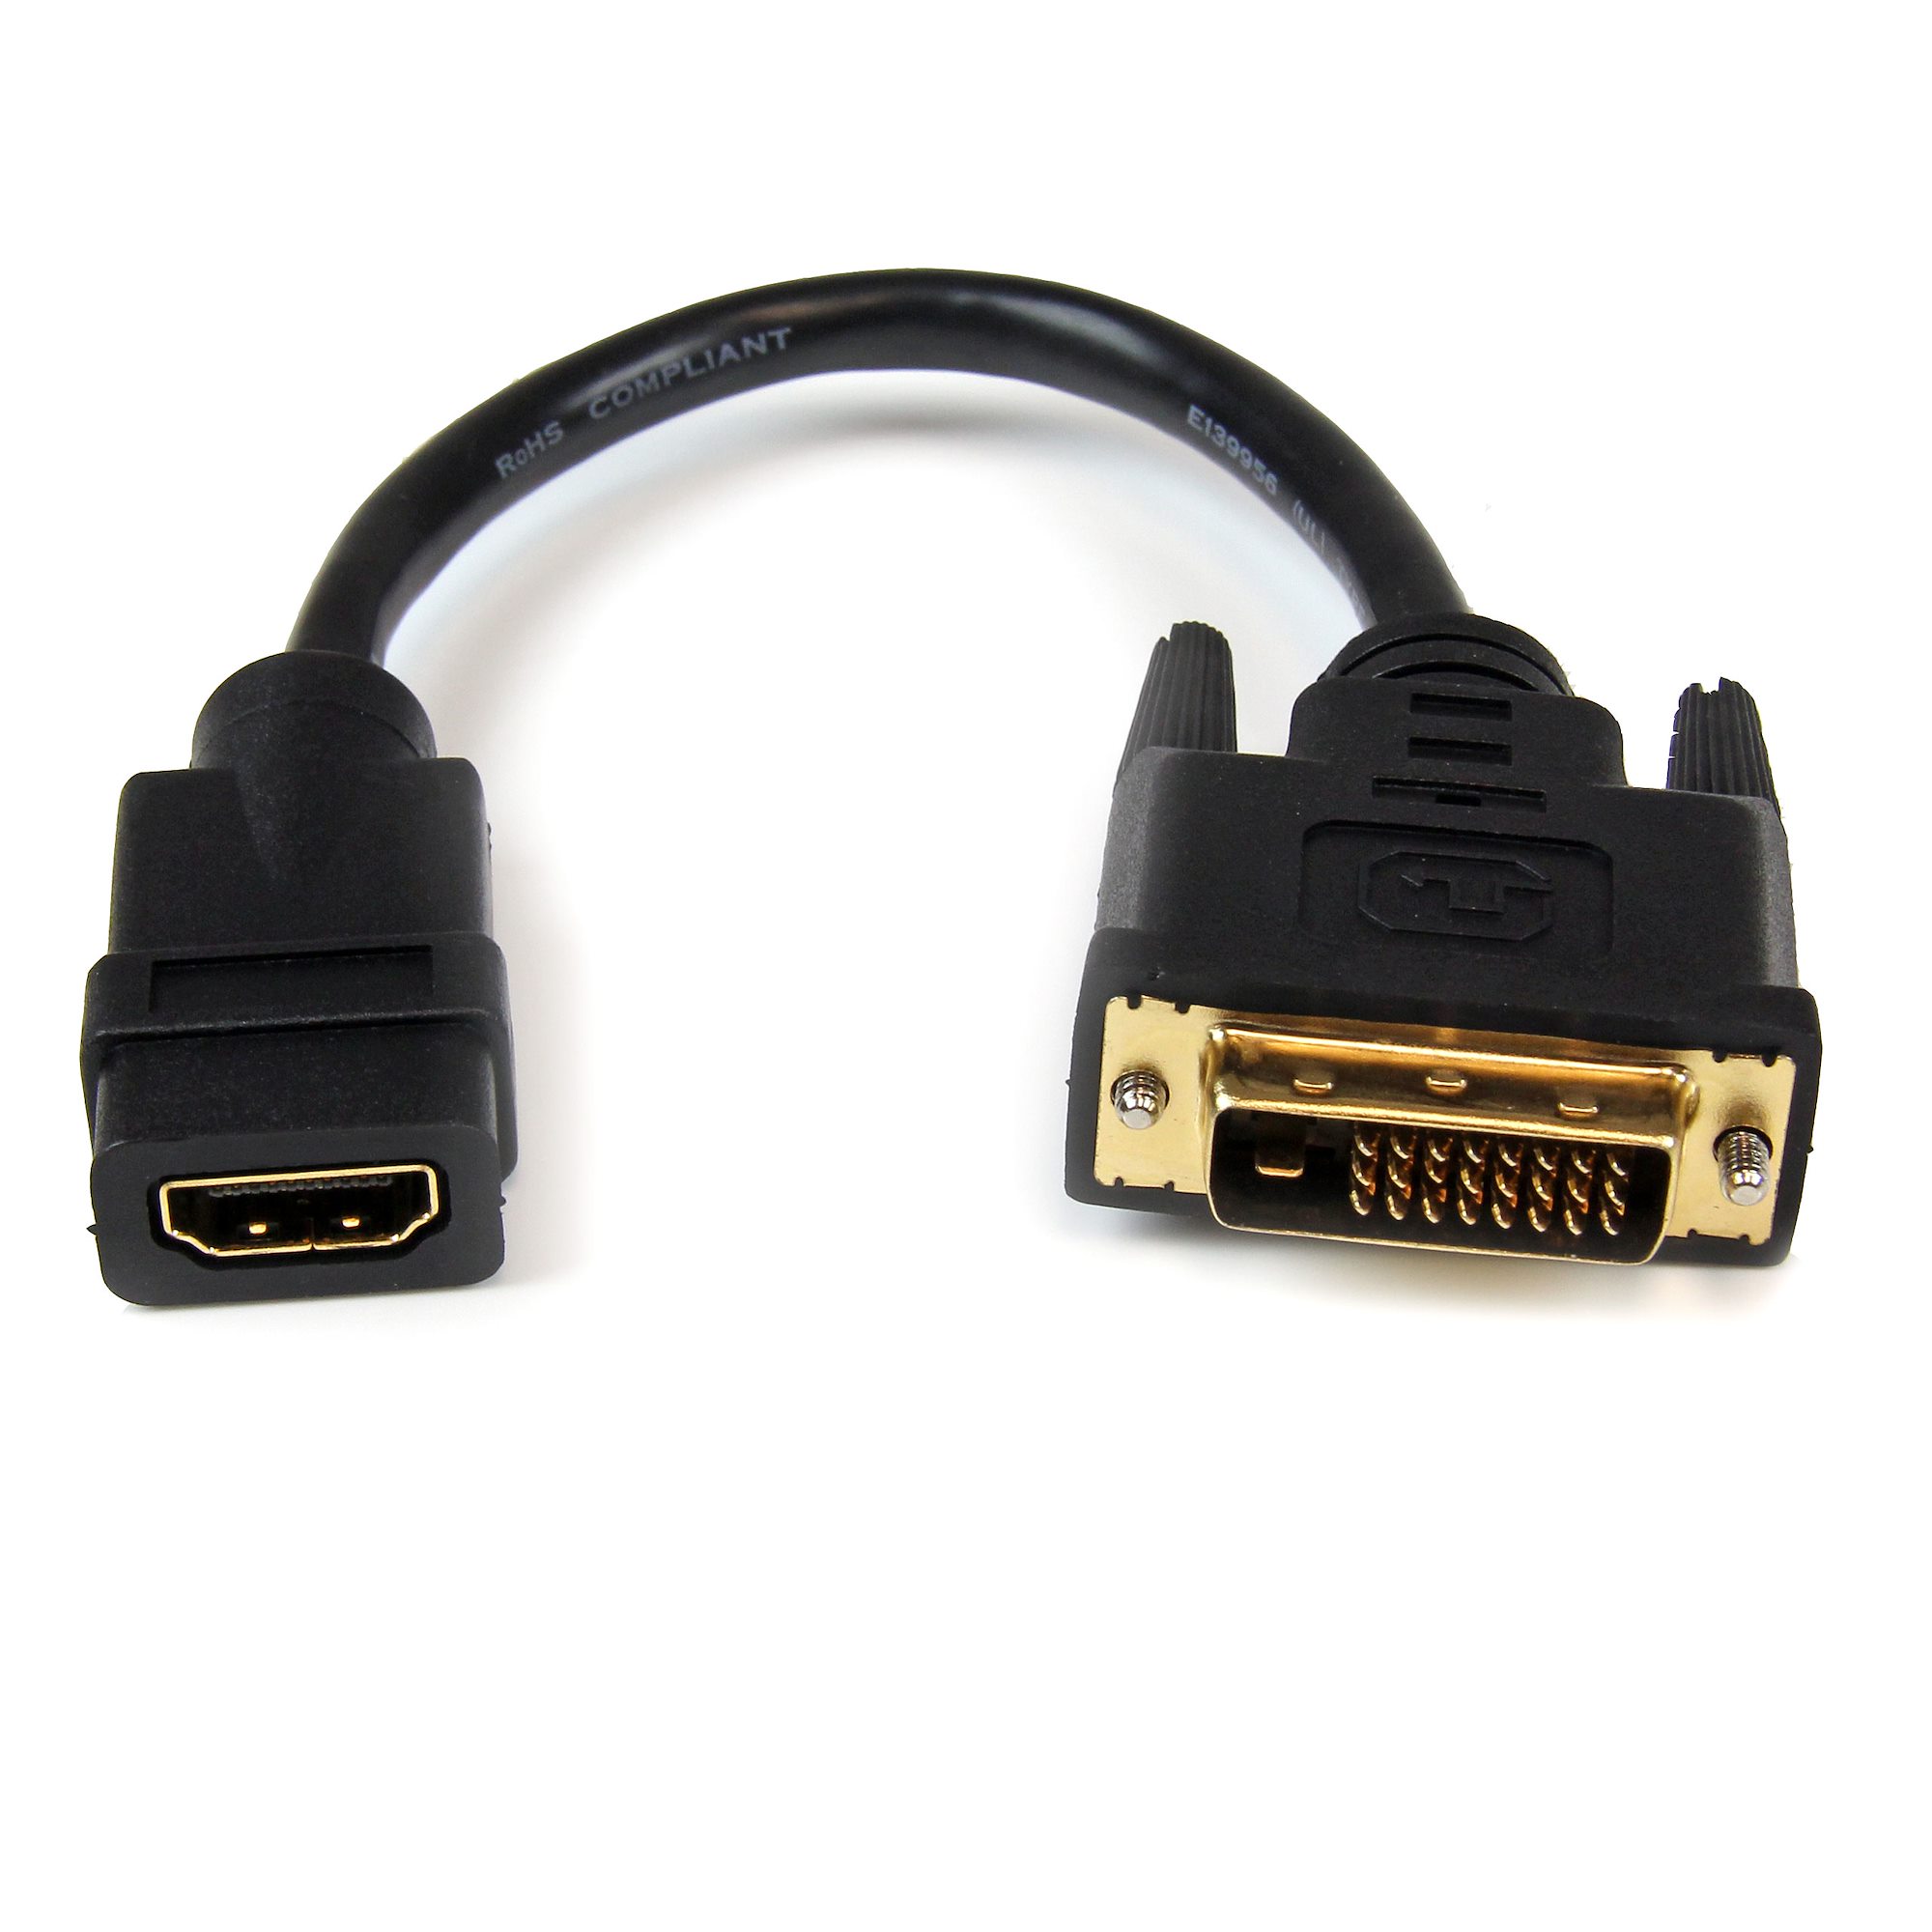 slave Mentalt Inspiration HDMI® to DVI-D Video Cable Adapter - F/M - HDMI® Cables & HDMI Adapters |  StarTech.com